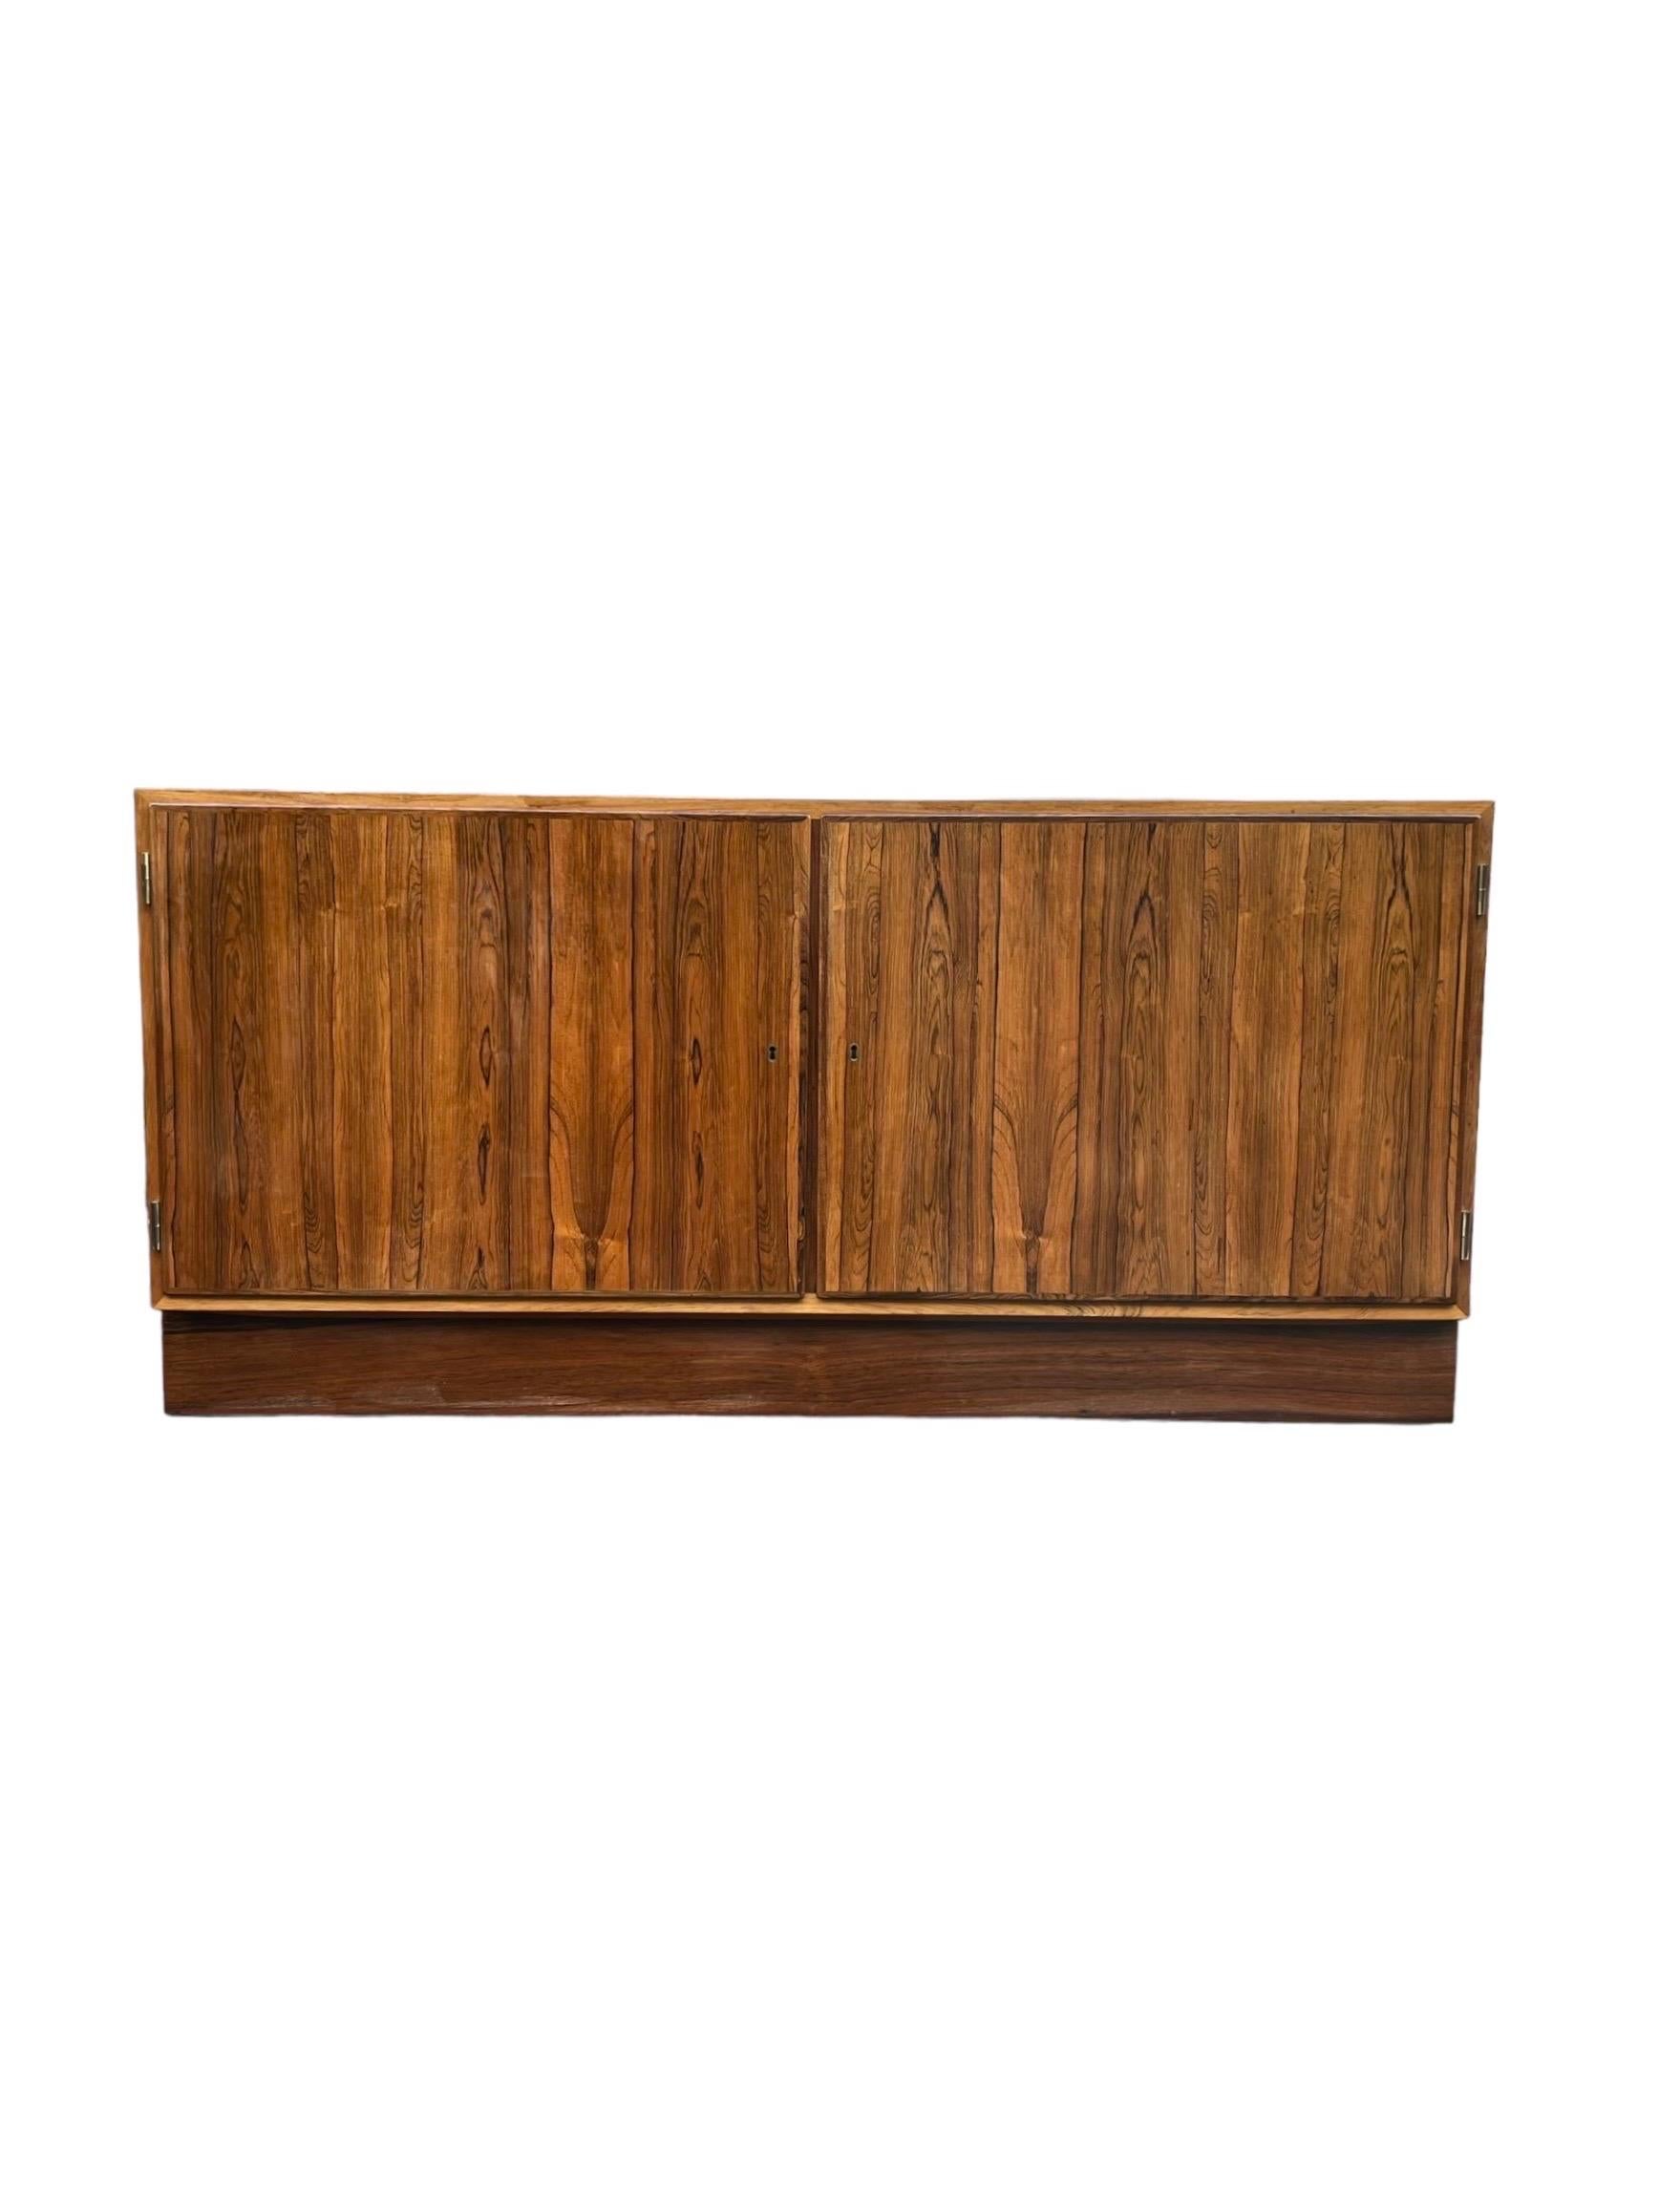 Vintage Mid Century Modern Danish Credenza Console , Side Board by Hundevad with Key

Dimensions. 54 W ; 17 D ; 27 H